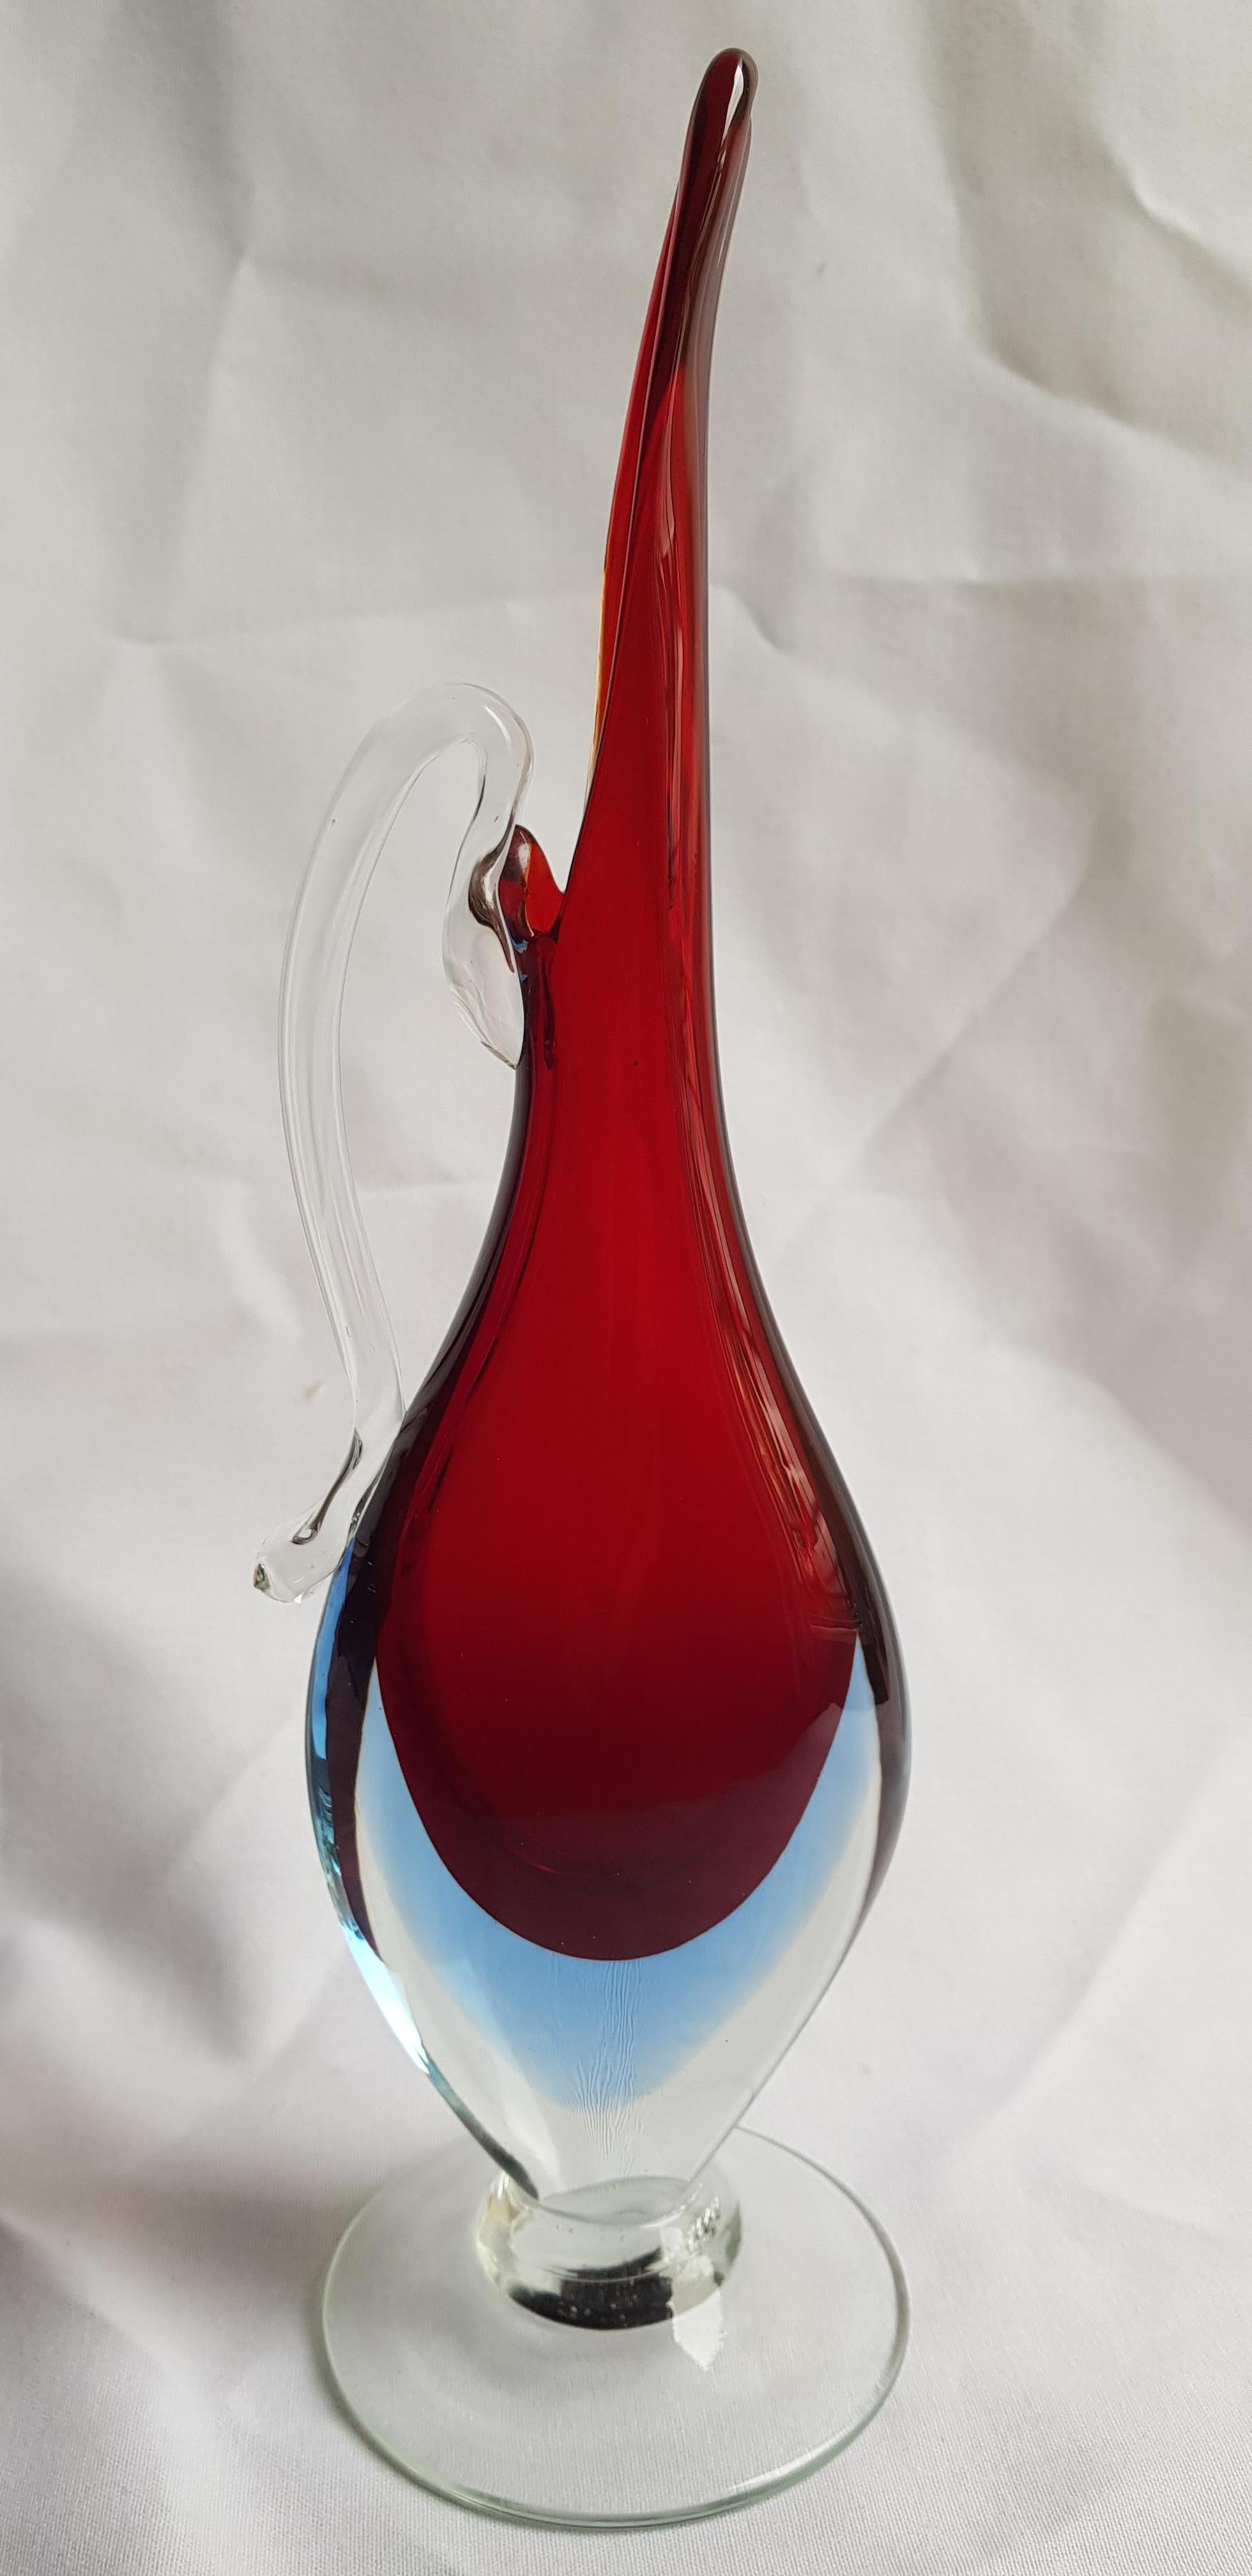 Beautiful middle of century Murano glass sommerso carafe,red, blue and clear brilliant condition.